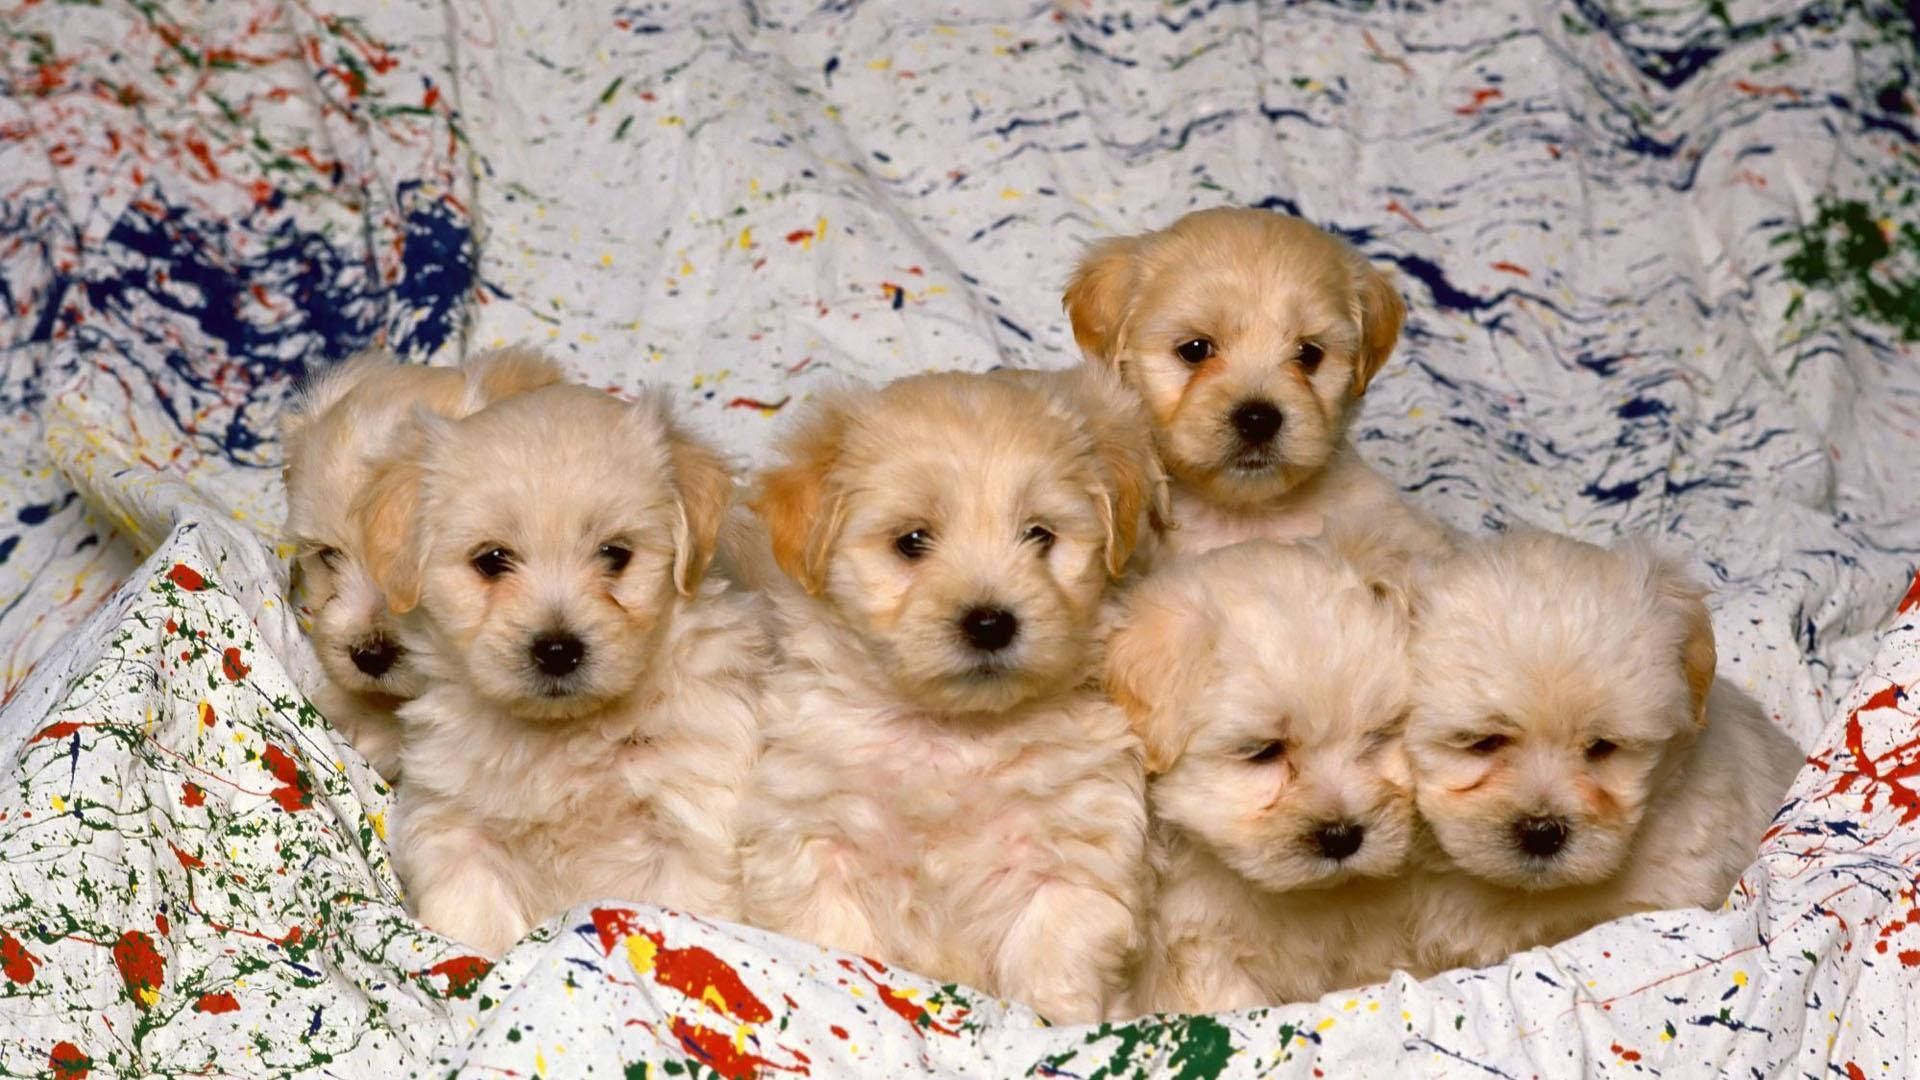 Puppies On Colorful Blanket Wallpaper